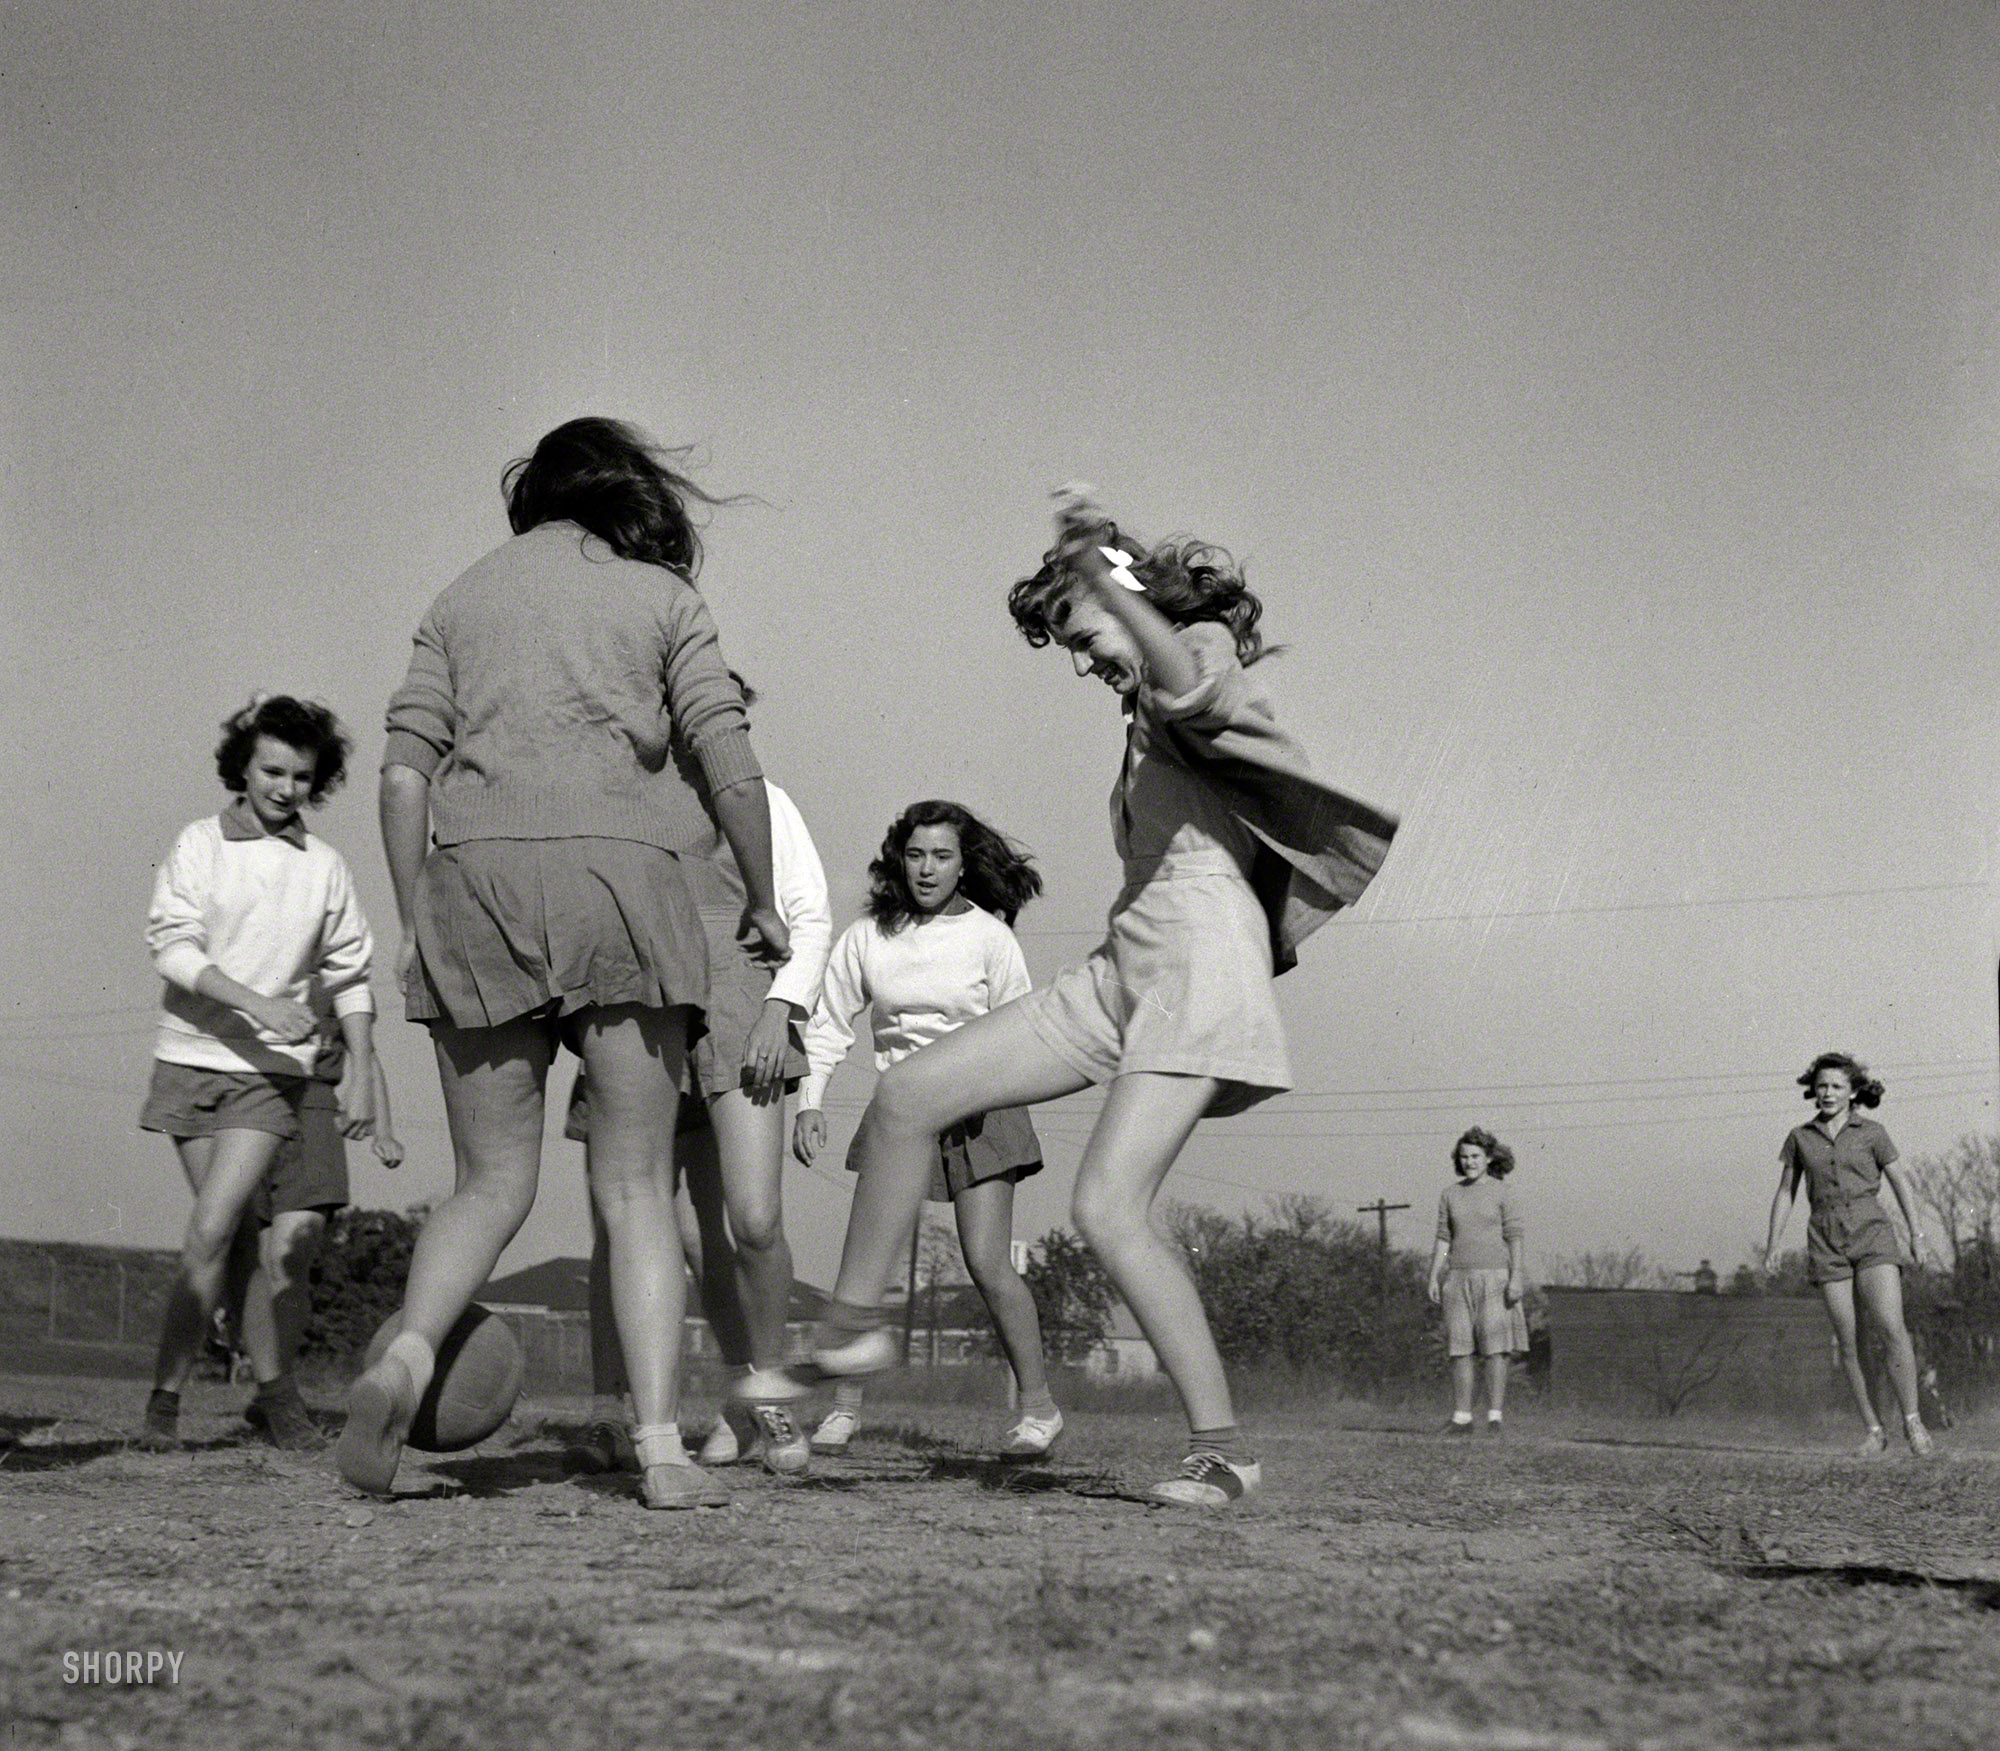 October 1943. Washington, D.C. "Girls playing soccer in physical education class at Woodrow Wilson High School." Saddle Shoes connects in a 1-0 nail-biter. Photo by Esther Bubley for the Office of War Information. View full size.